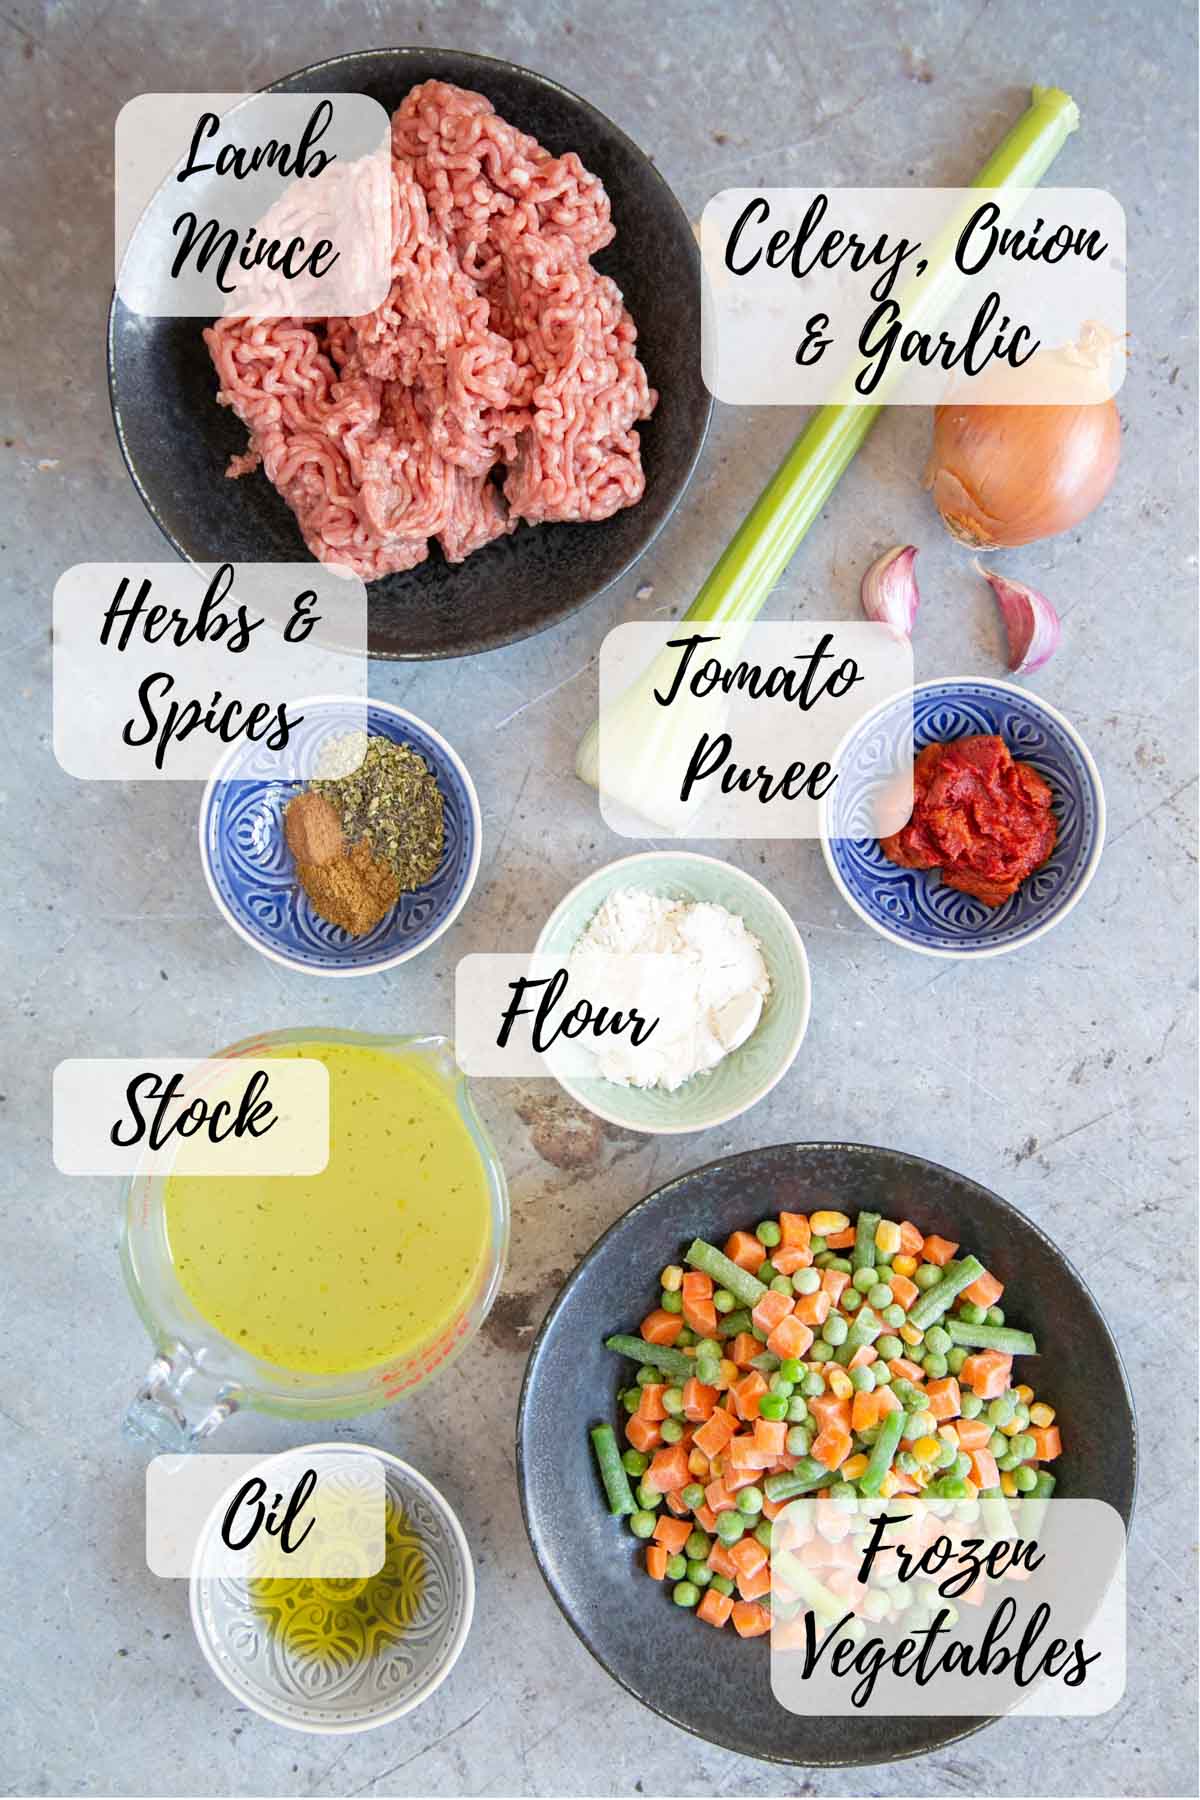 Ingredients for savoury lamb mince: oil, onion, garlic and celery, herbs and spices, flour, lamb mince, stock, tomato puree, and frozen vegetables.